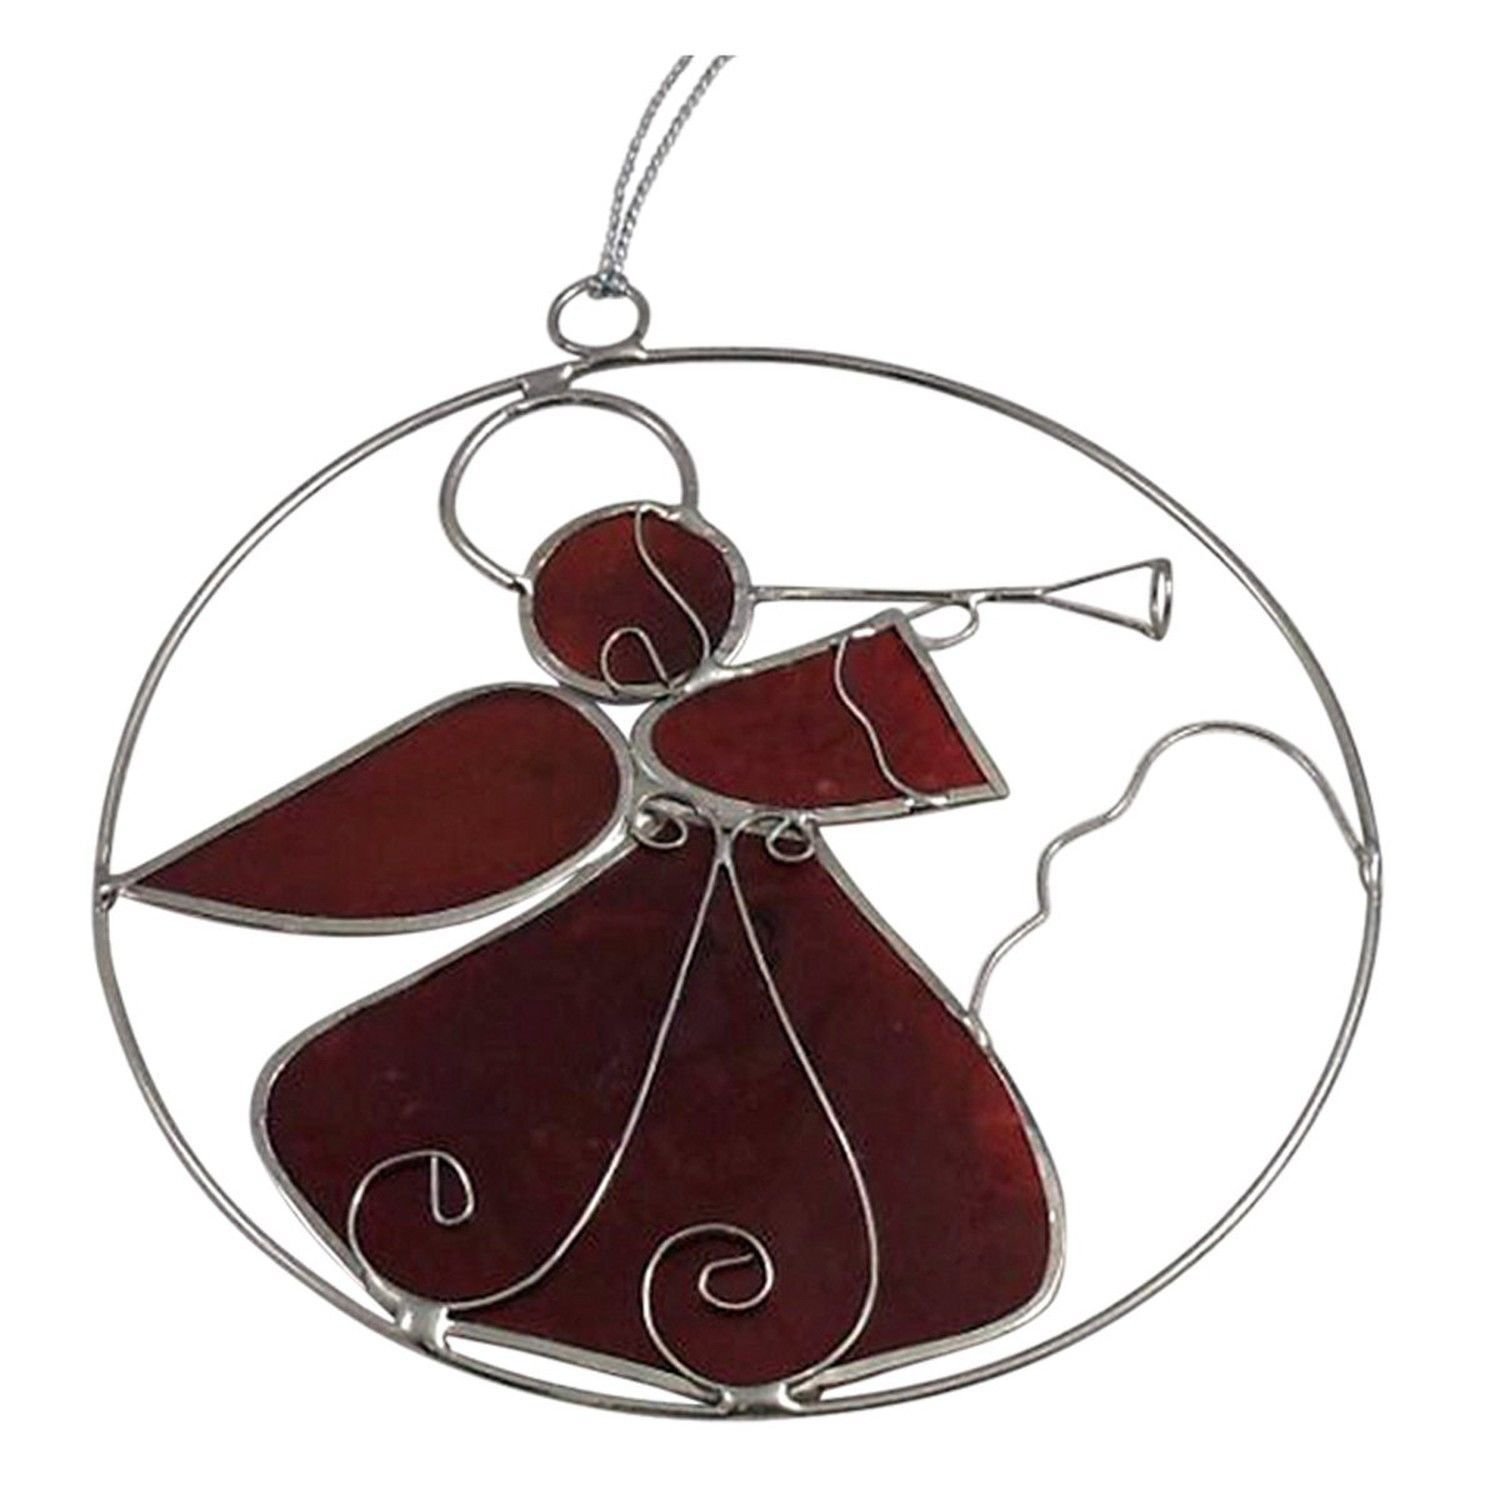 Angel Capiz Shell Cherry Red Sun Catcher Holiday Ornament Silver Tone Metal